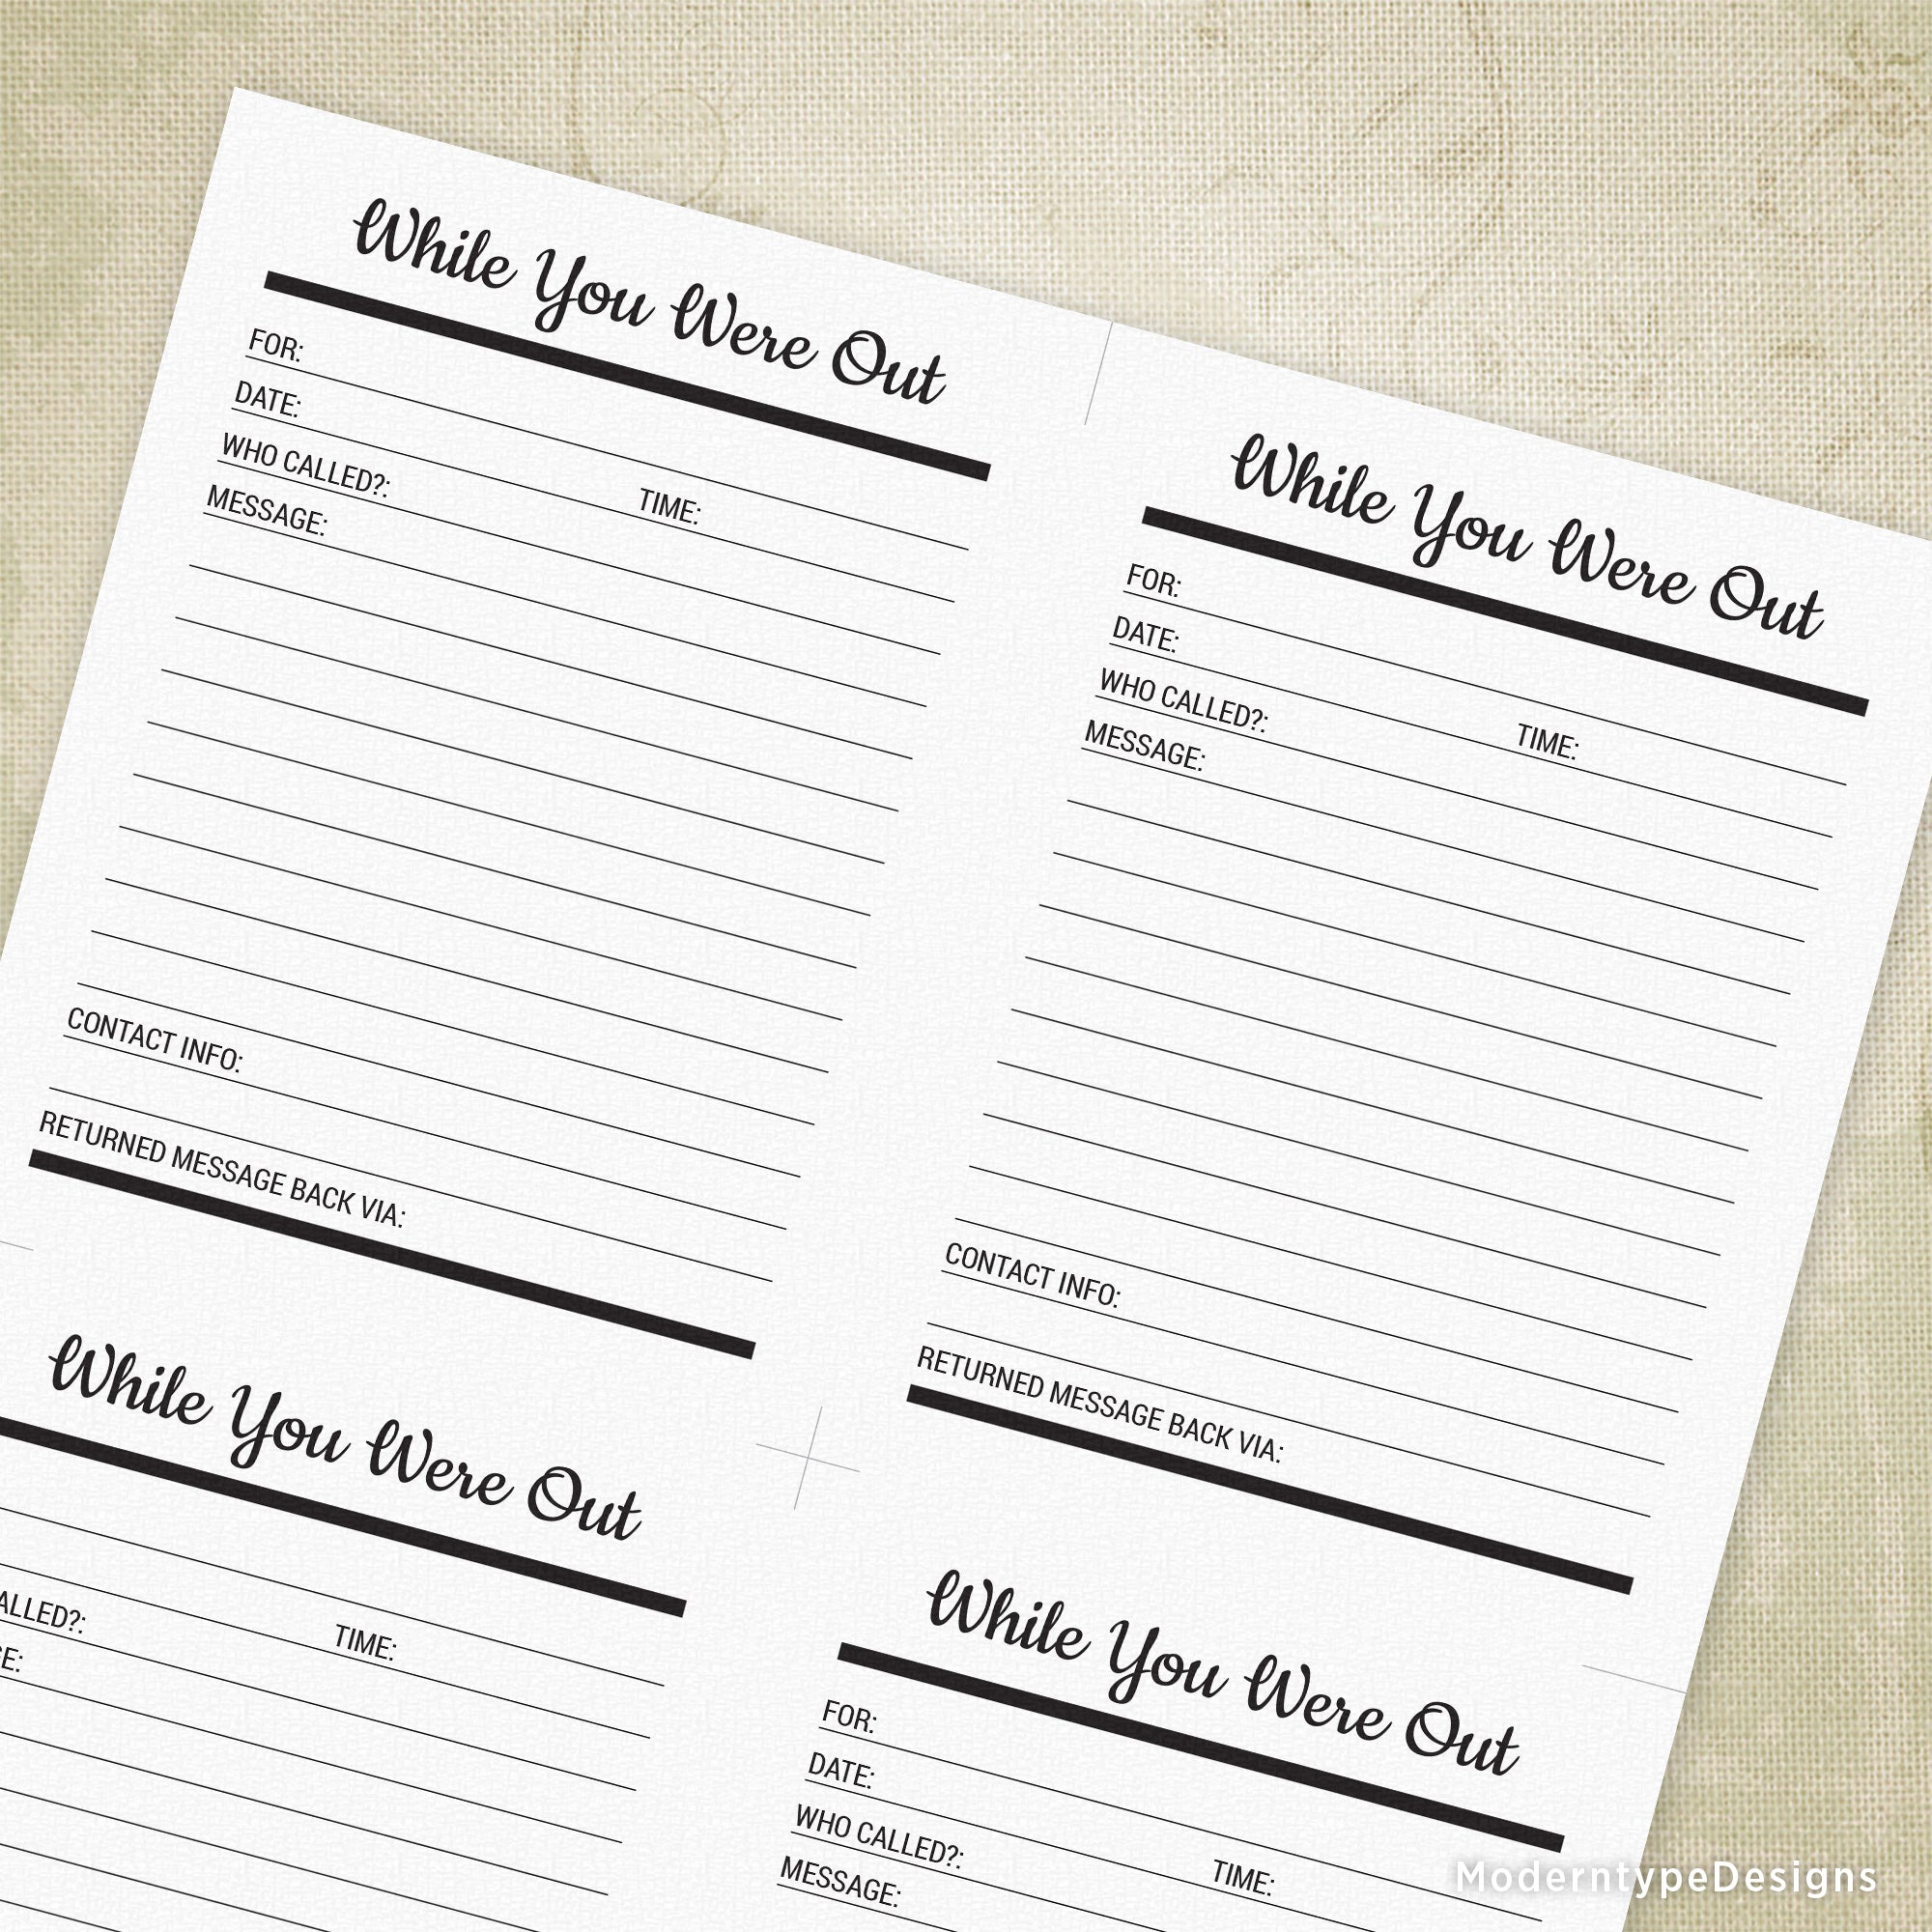 While You Were Out Sheet Printable, 4.25 x 5.5"